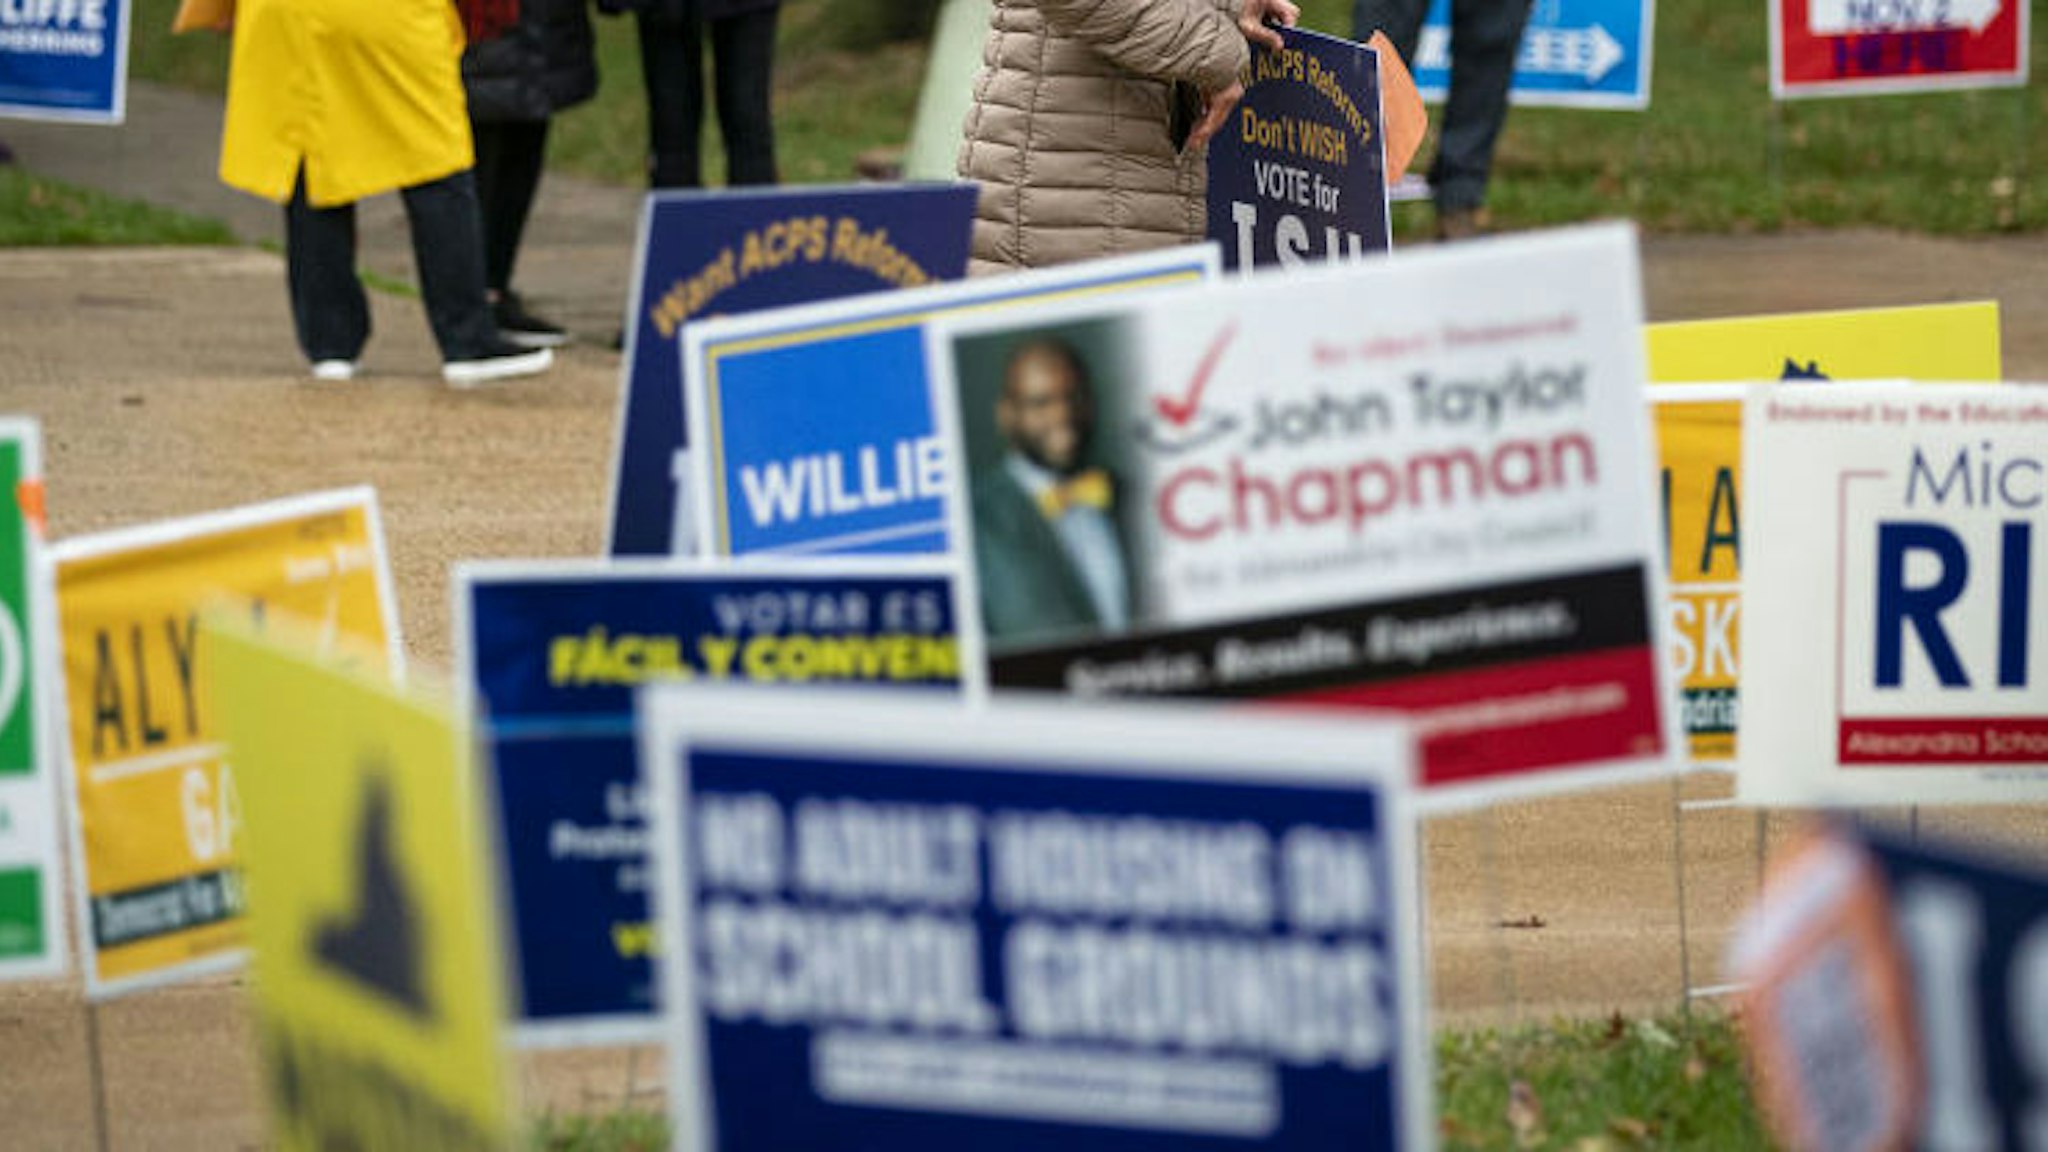 Campaign signs outside of a polling location in Alexandria, Virginia, U.S., on Tuesday, Nov. 2, 2021. Virginia's gubernatorial contest between Terry McAuliffe and Glenn Youngkin will offer the clearest picture yet of how much momentum Republicans have heading into 2022 elections that will decide control of Congress.